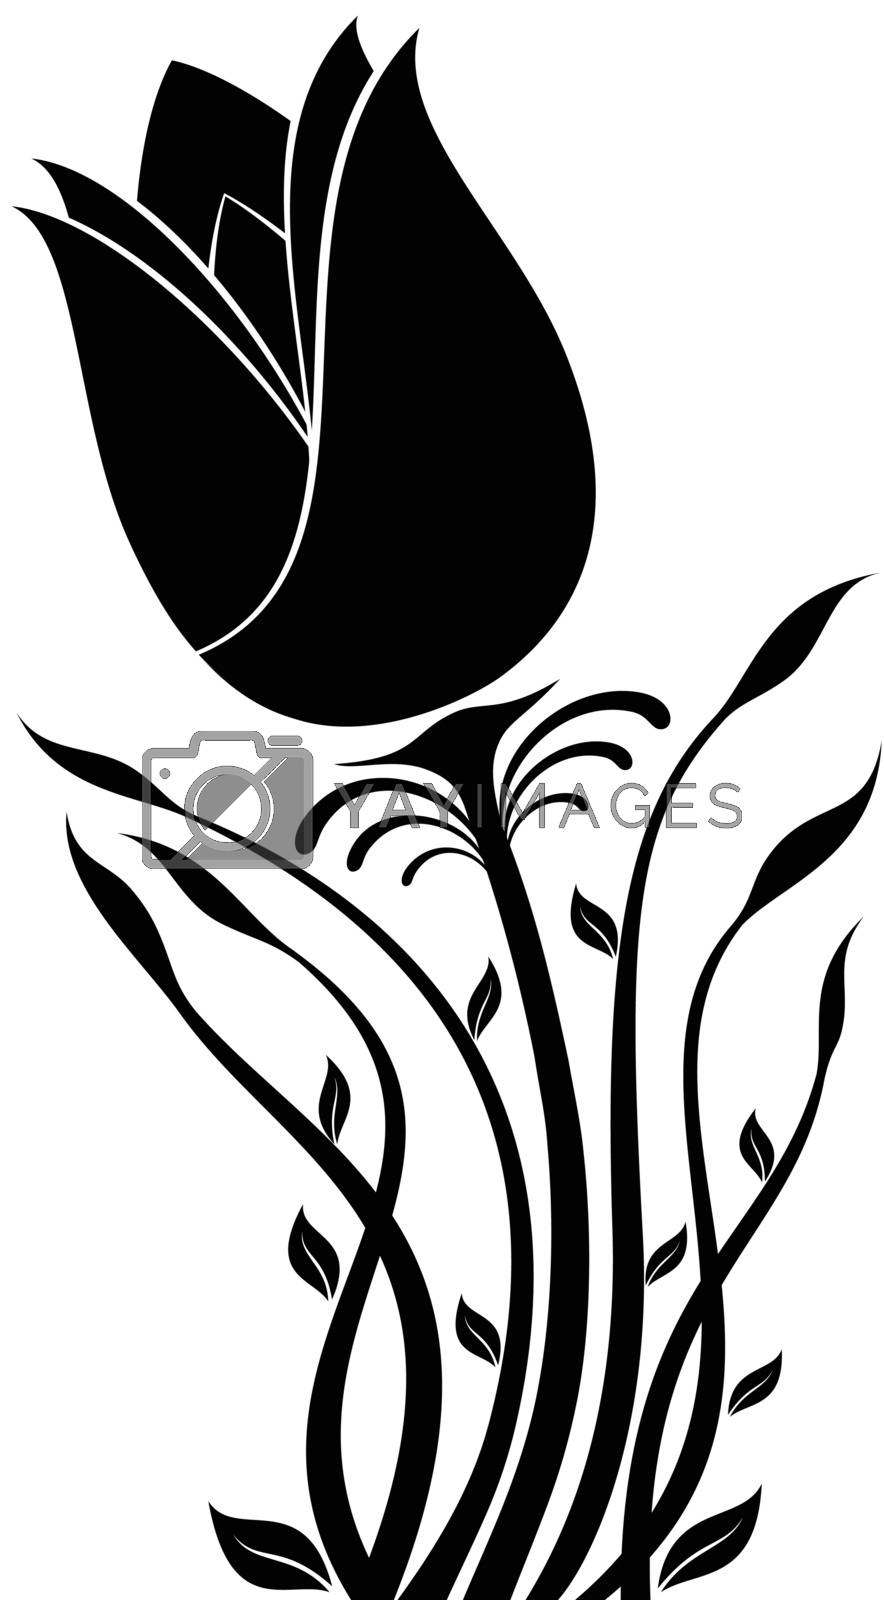 Royalty free image of Flower Silhouette by silverrose1